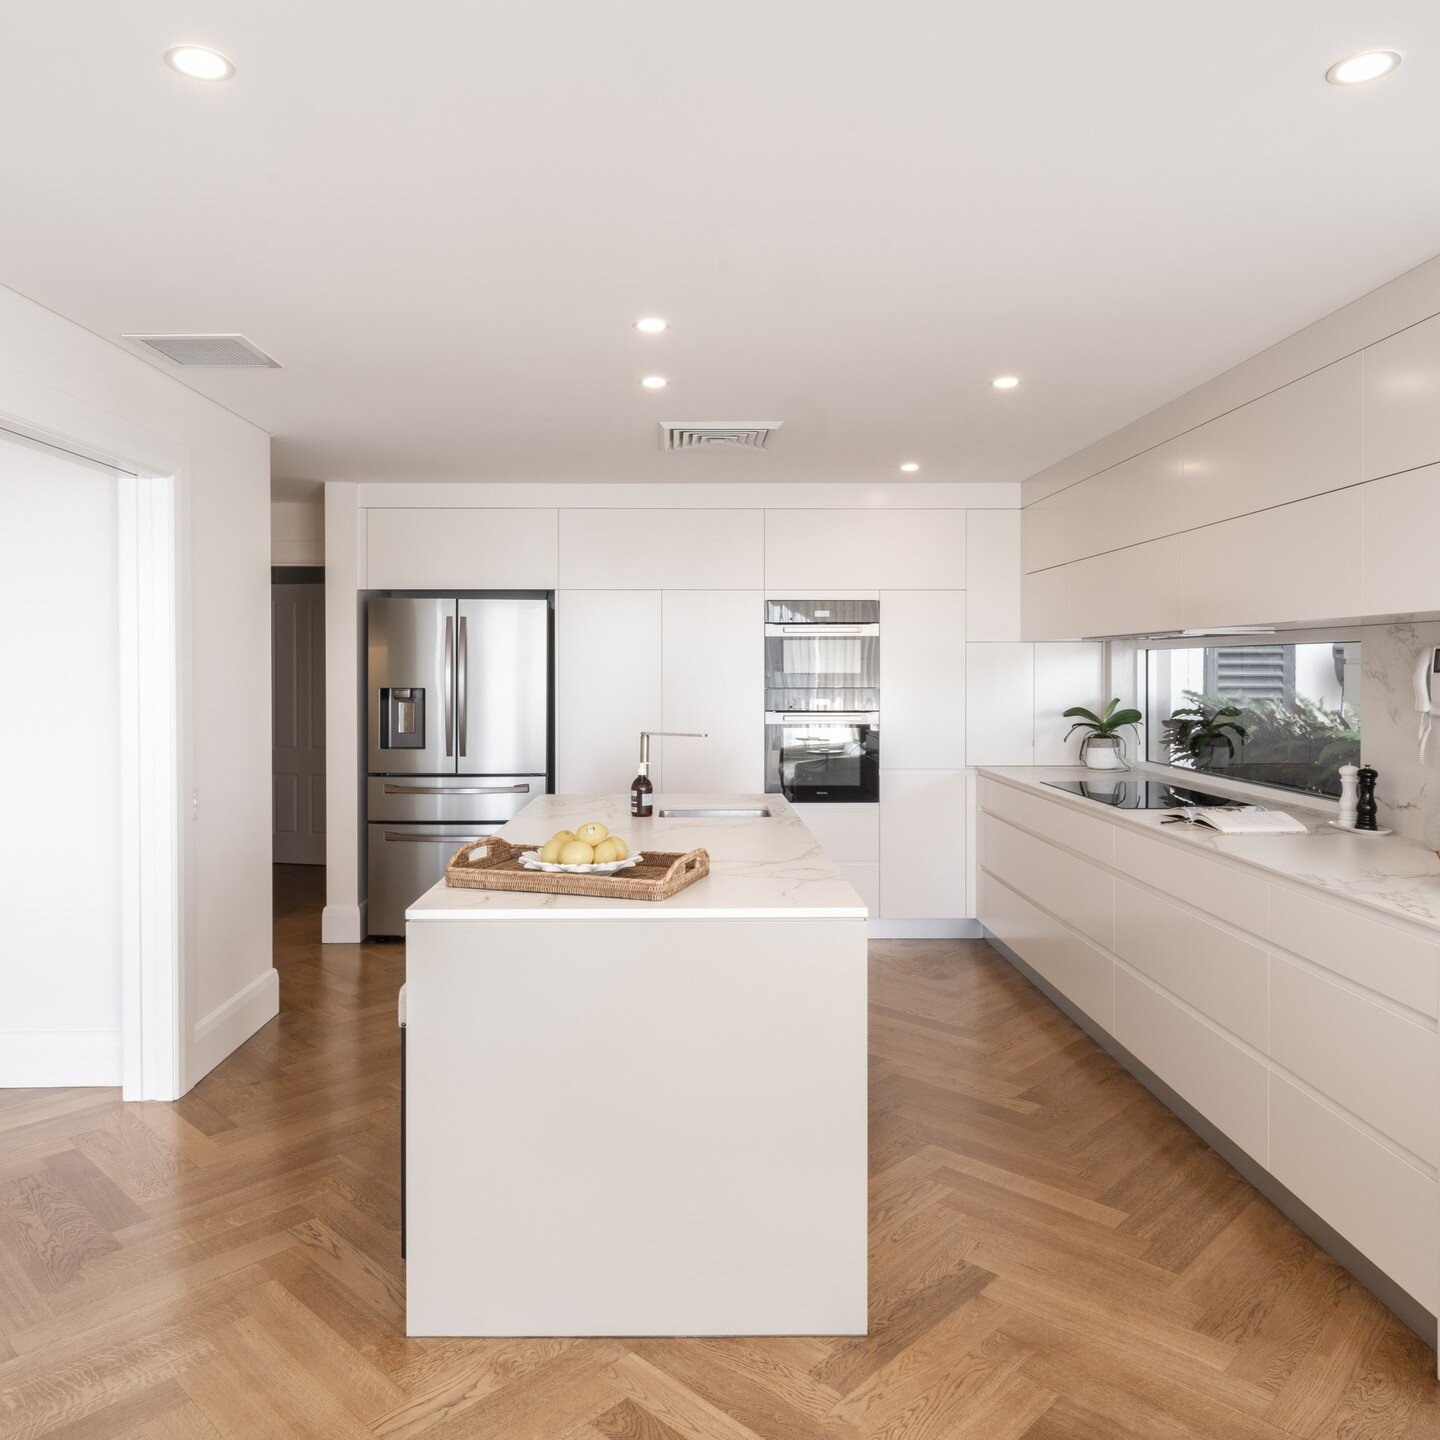 New kitchen -Penthouse reno-Balmain 
The kitchen area was opened up to create an island for the family to congregate around. 
#homerenovation #penthouse #interiordesign #joinery #architectdesign #kitchen #kitchendesign #balmain #sydneyhomes 
Floors b